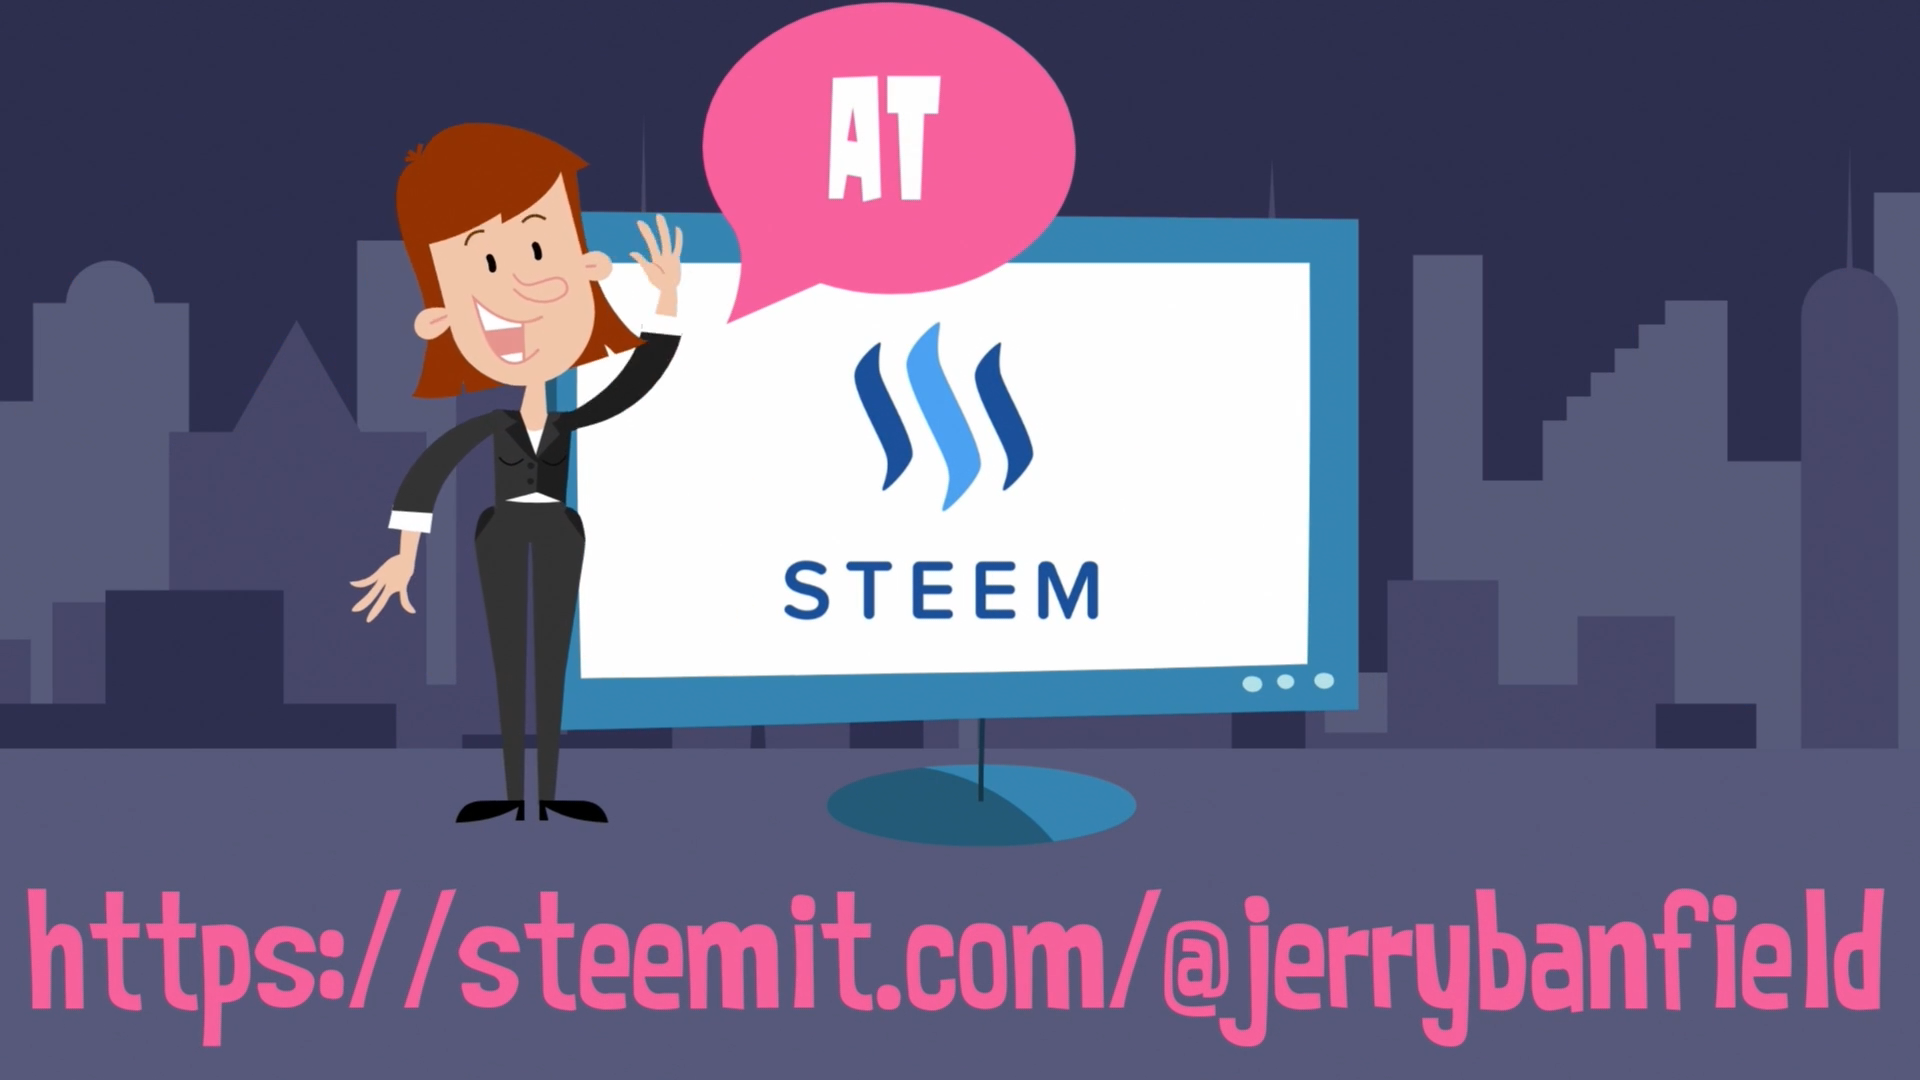 Steem video ad 7 frame 6.png